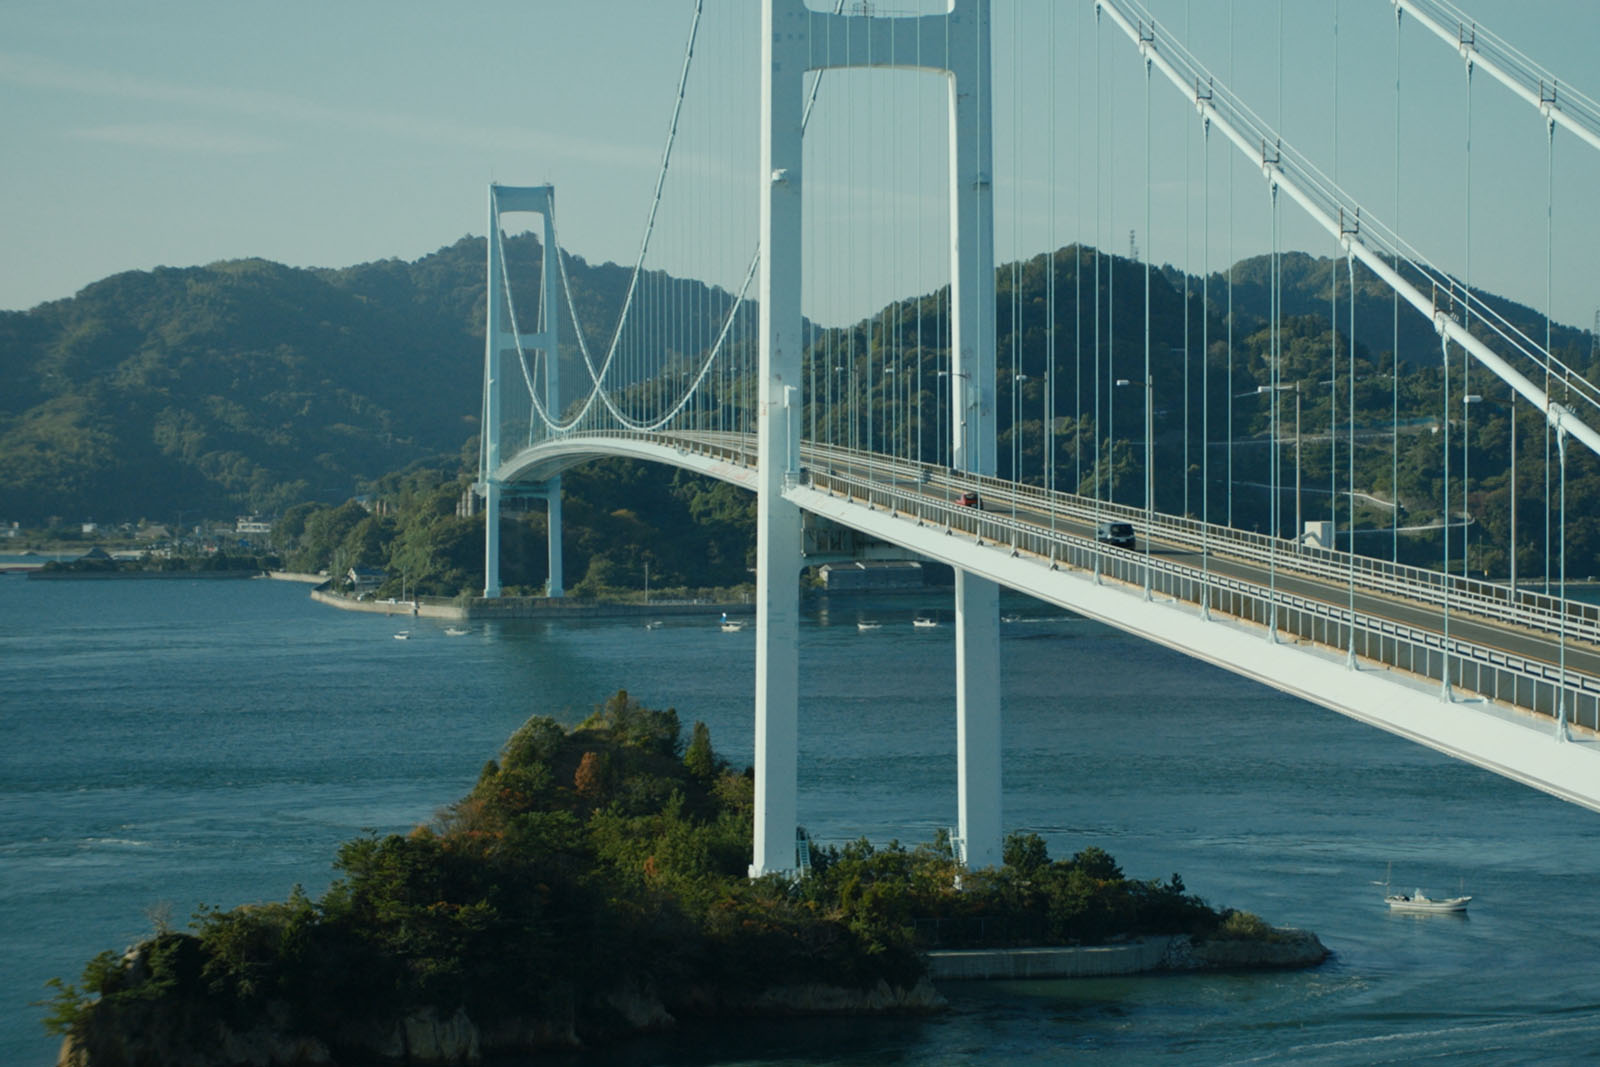 Akinada Bridge, Tokyo, is one of the locations featured in Drive My Car. Image © Bitters End